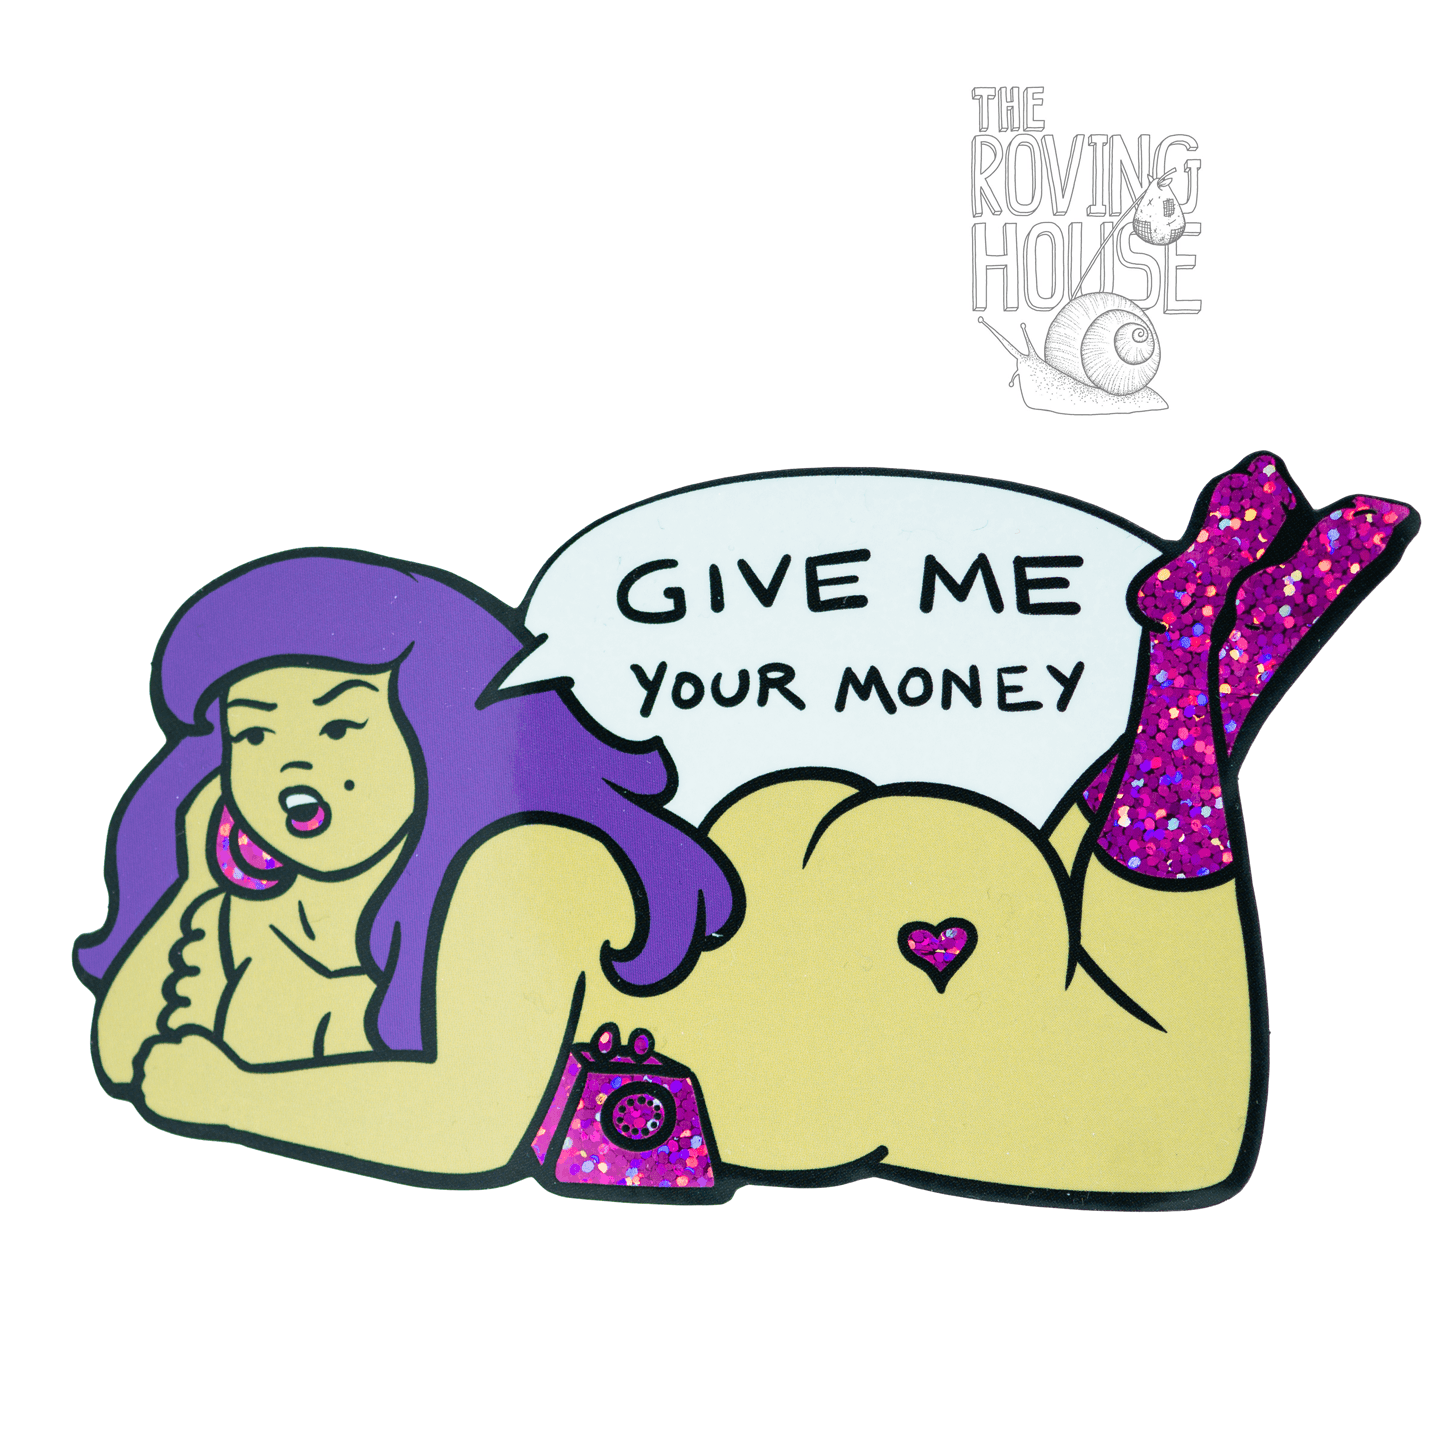 A glitter sticker of a large nude woman on the phone yelling "give me your money".